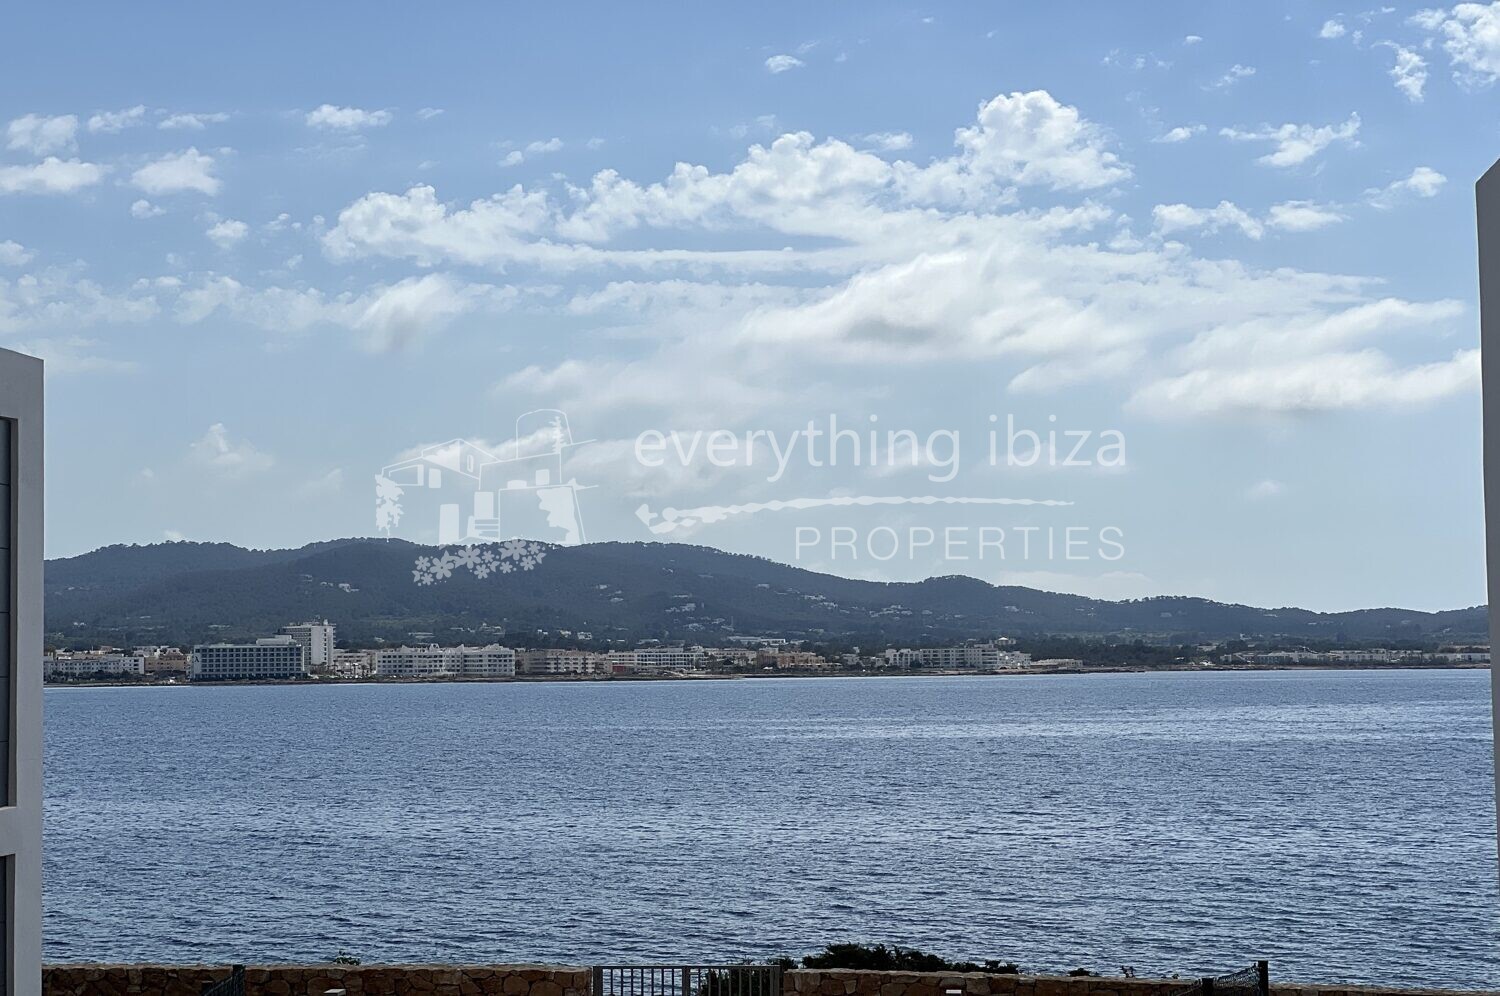 Quality Frontline 2 Bed Apartment in Cala Gracio, ref. 1428, for sale in Ibiza by everything ibiza Properties